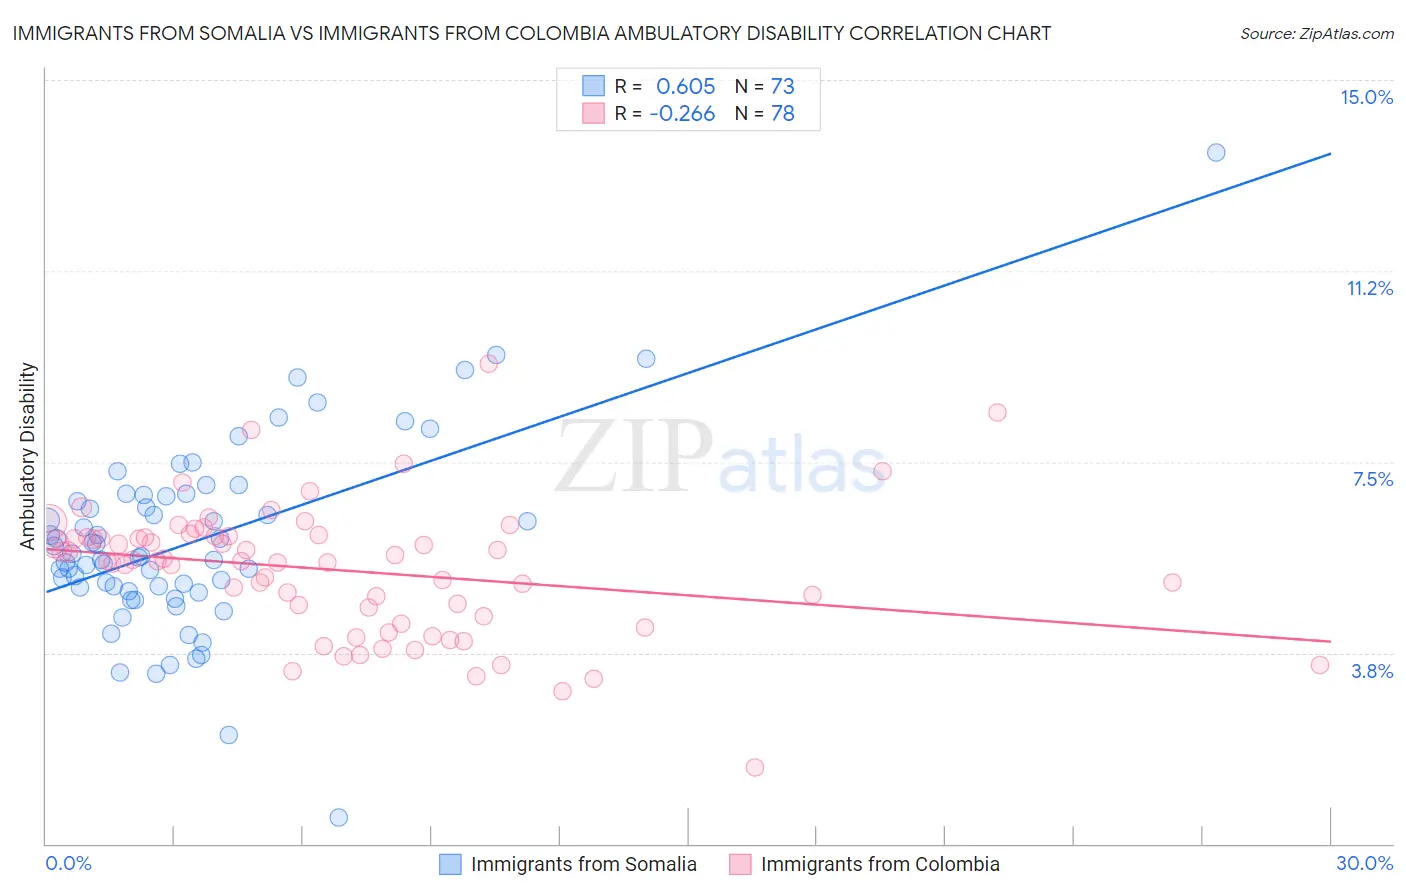 Immigrants from Somalia vs Immigrants from Colombia Ambulatory Disability